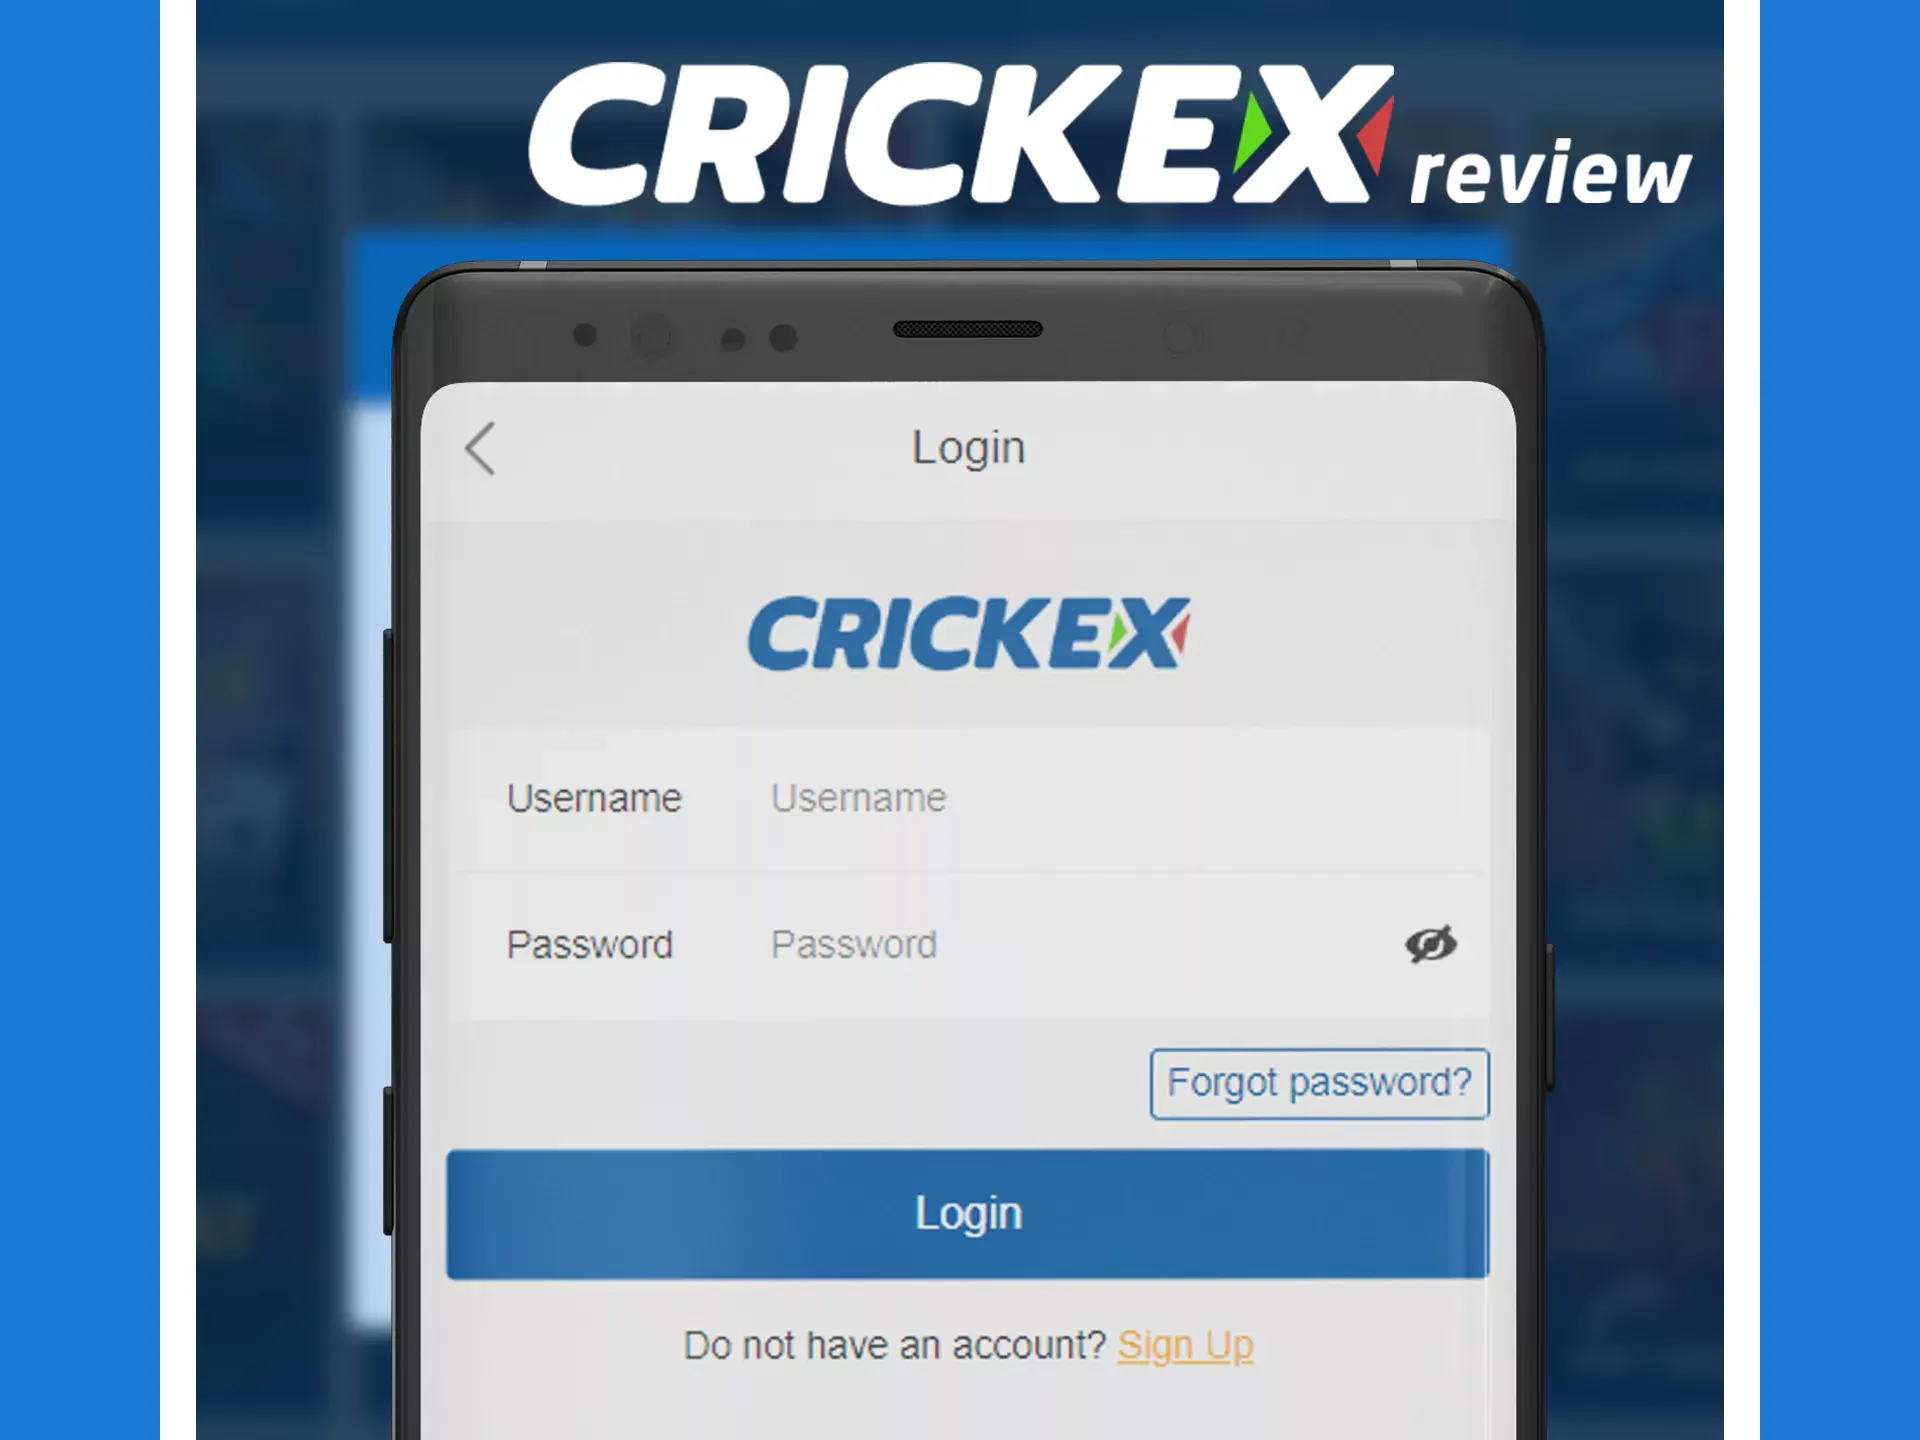 Signing up for an account in the Crickex app doesn't take much time.